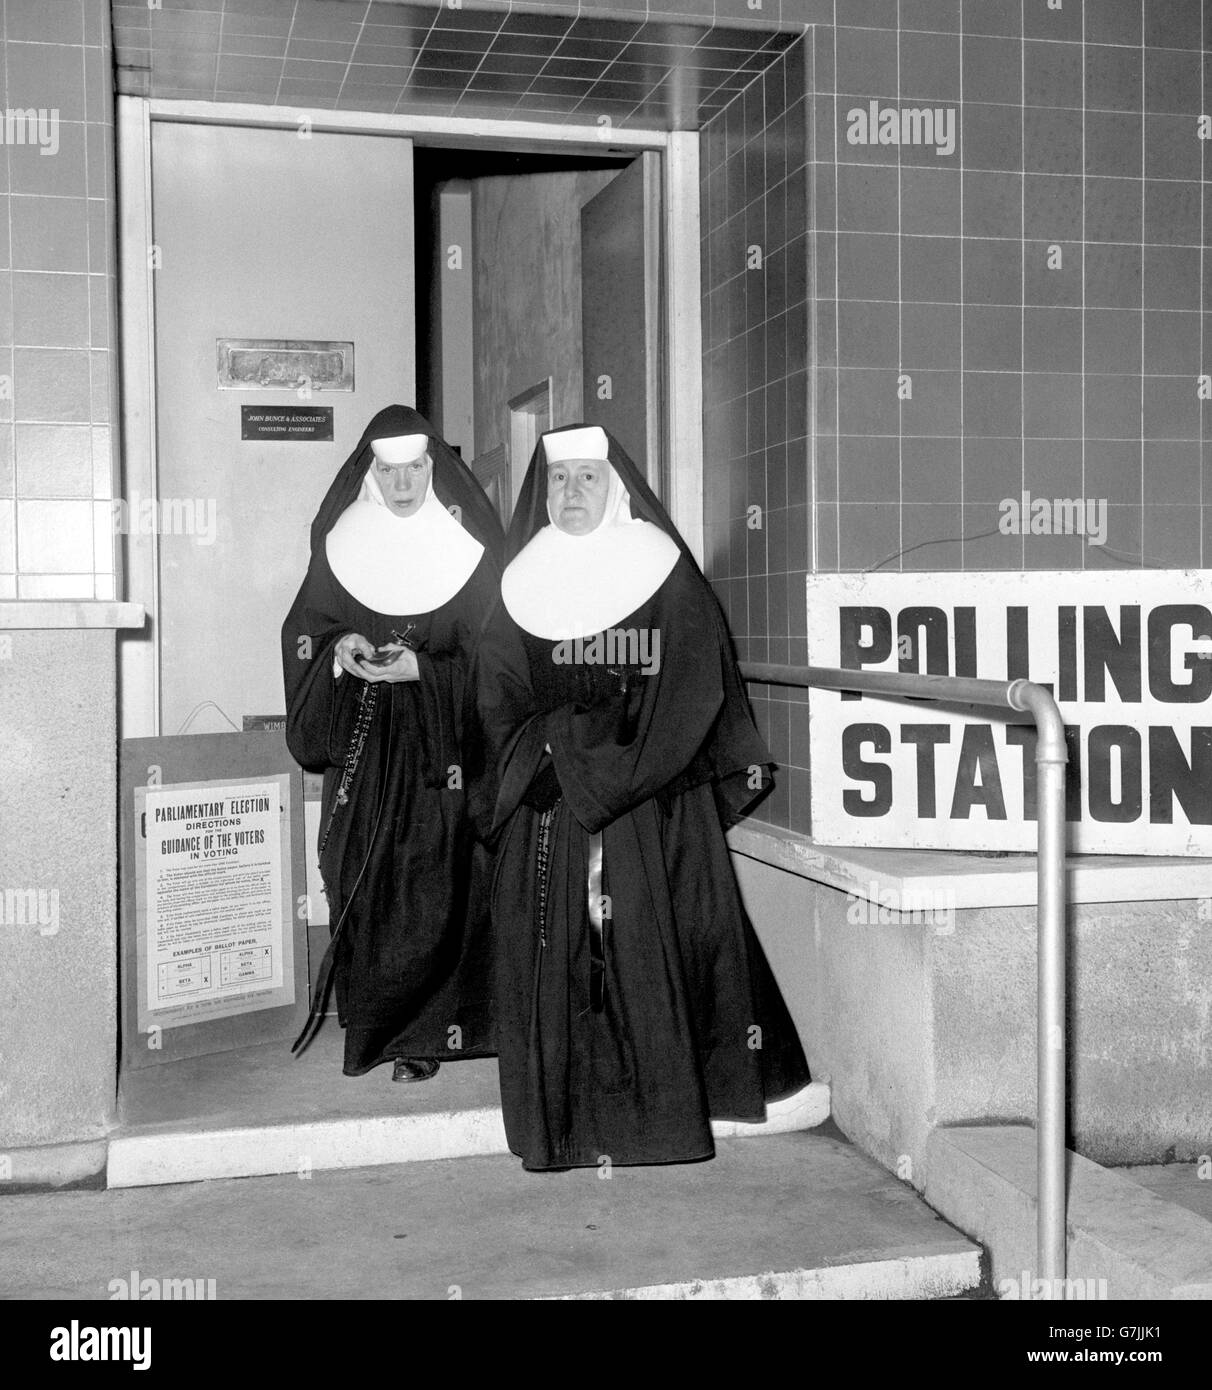 Nuns from the Ursuline Convent leave a Wimbledon polling station after casting their votes in the General Election. Stock Photo